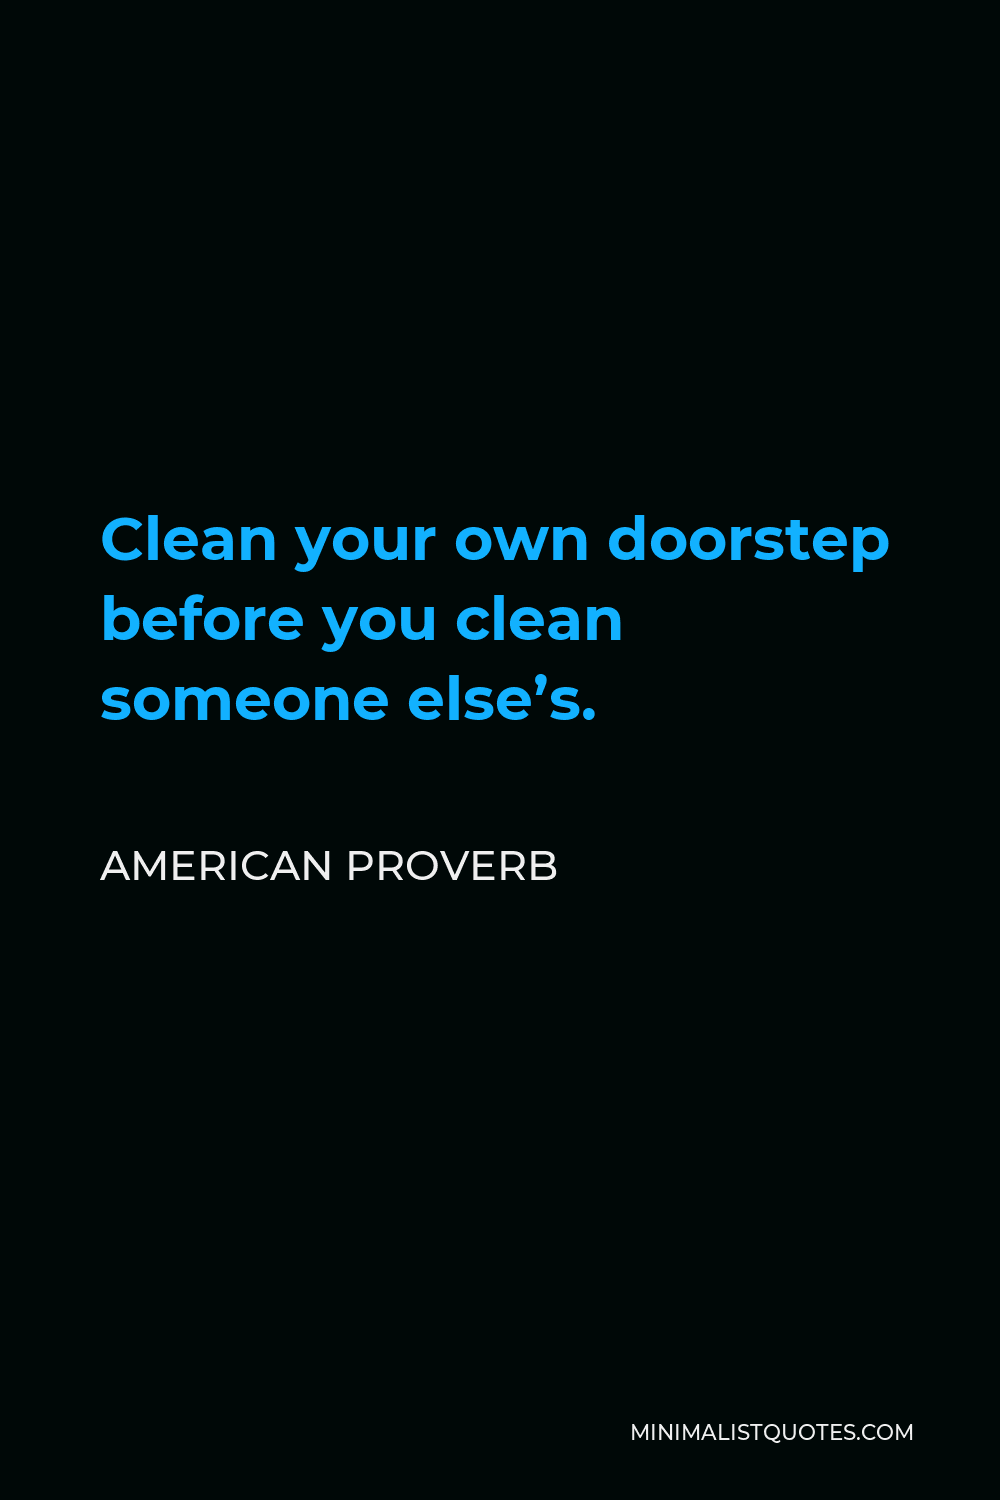 American Proverb Quote - Clean your own doorstep before you clean someone else’s.